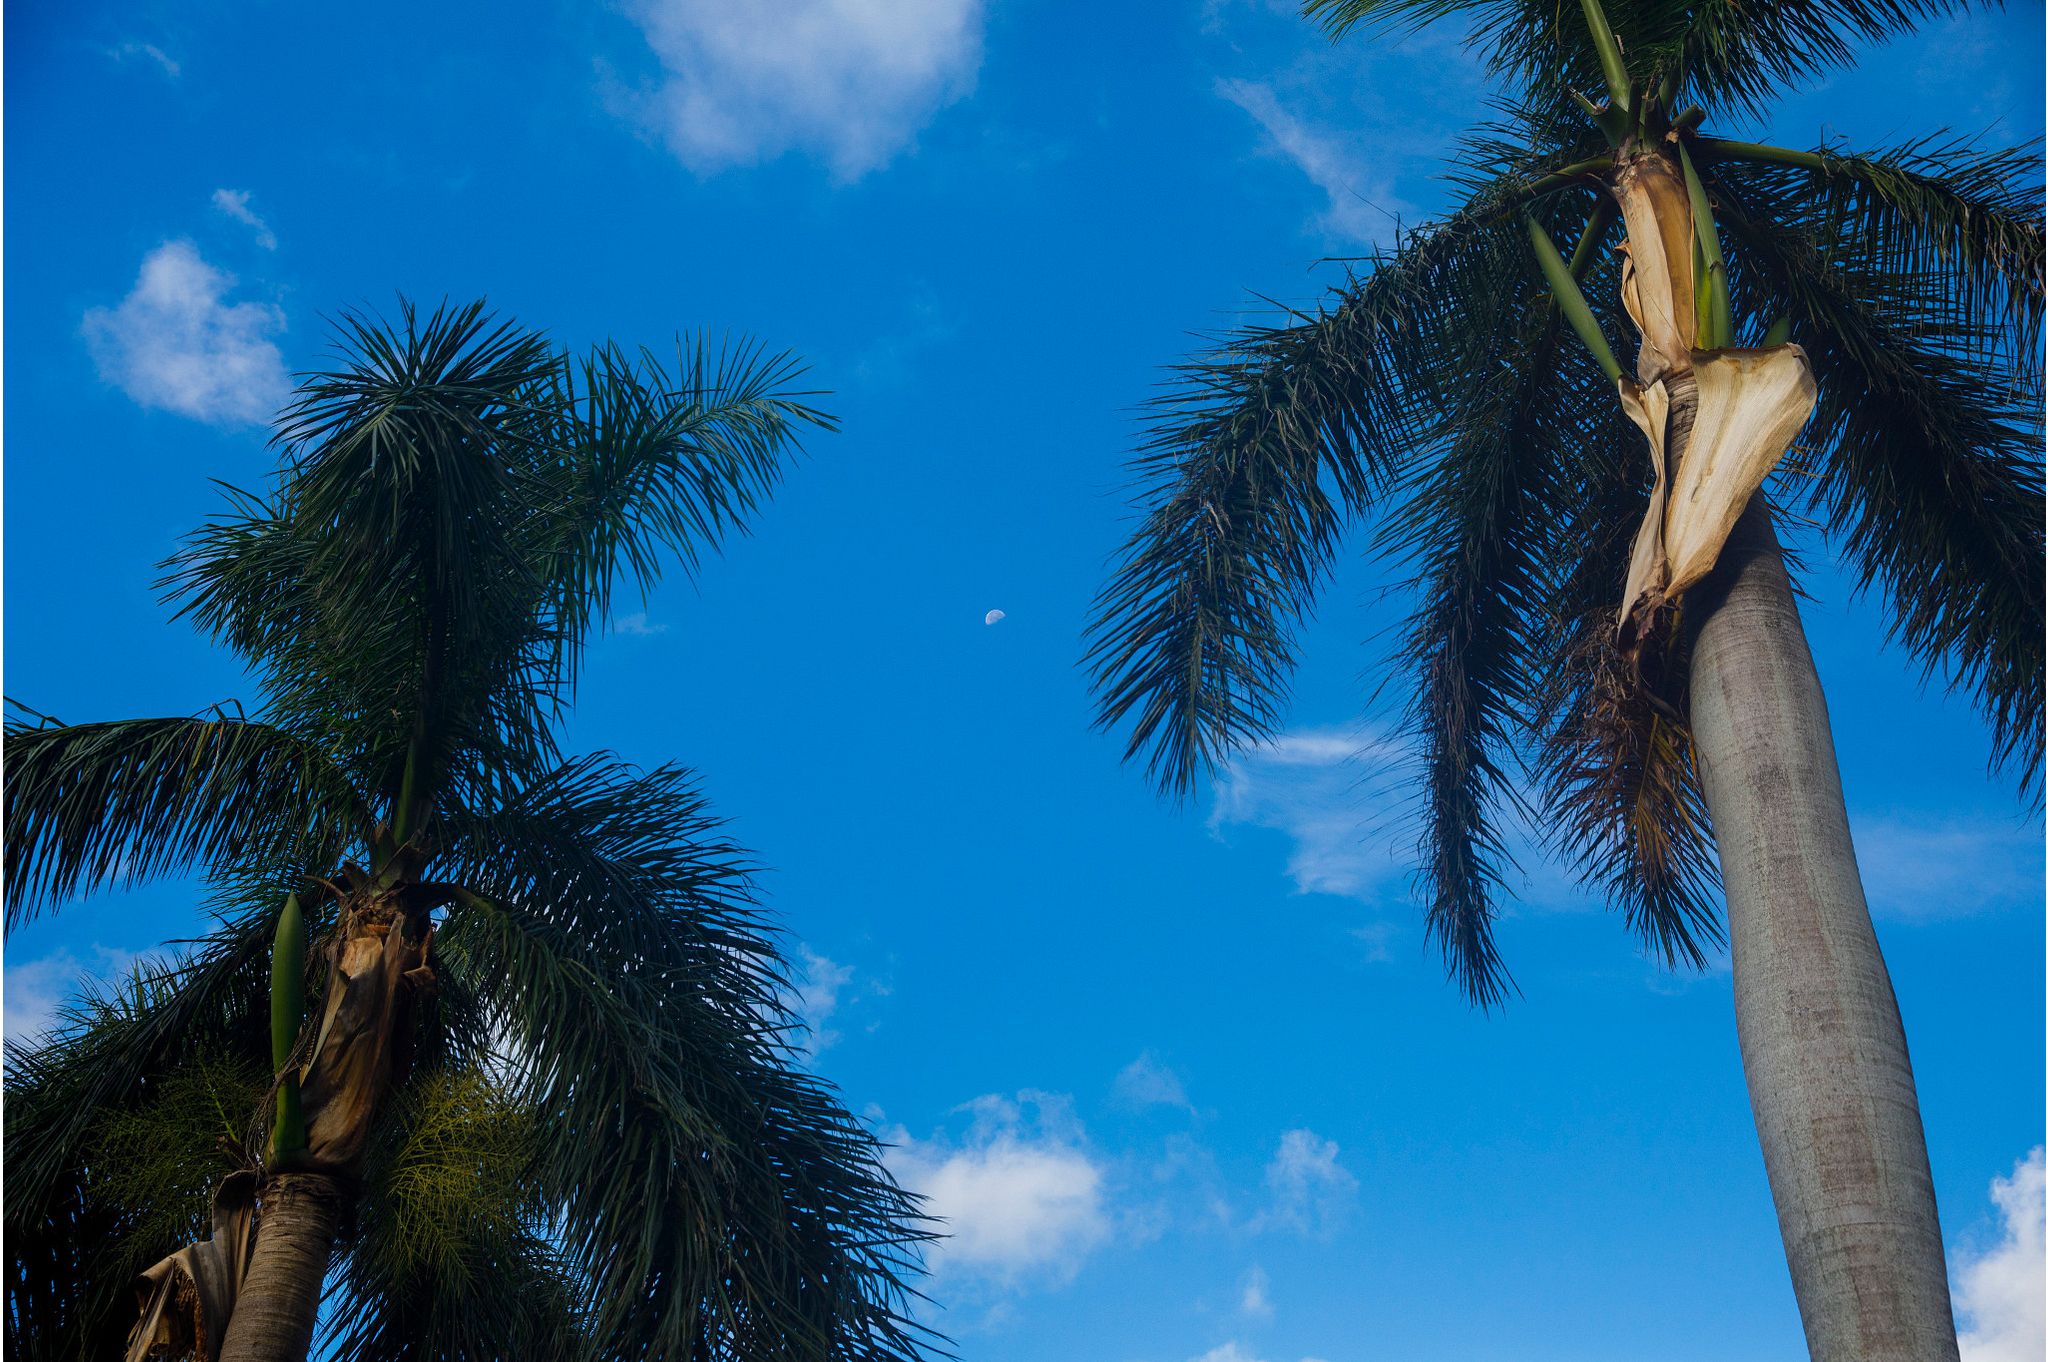 Looking up at the brilliant blue sky beneath two palm trees.